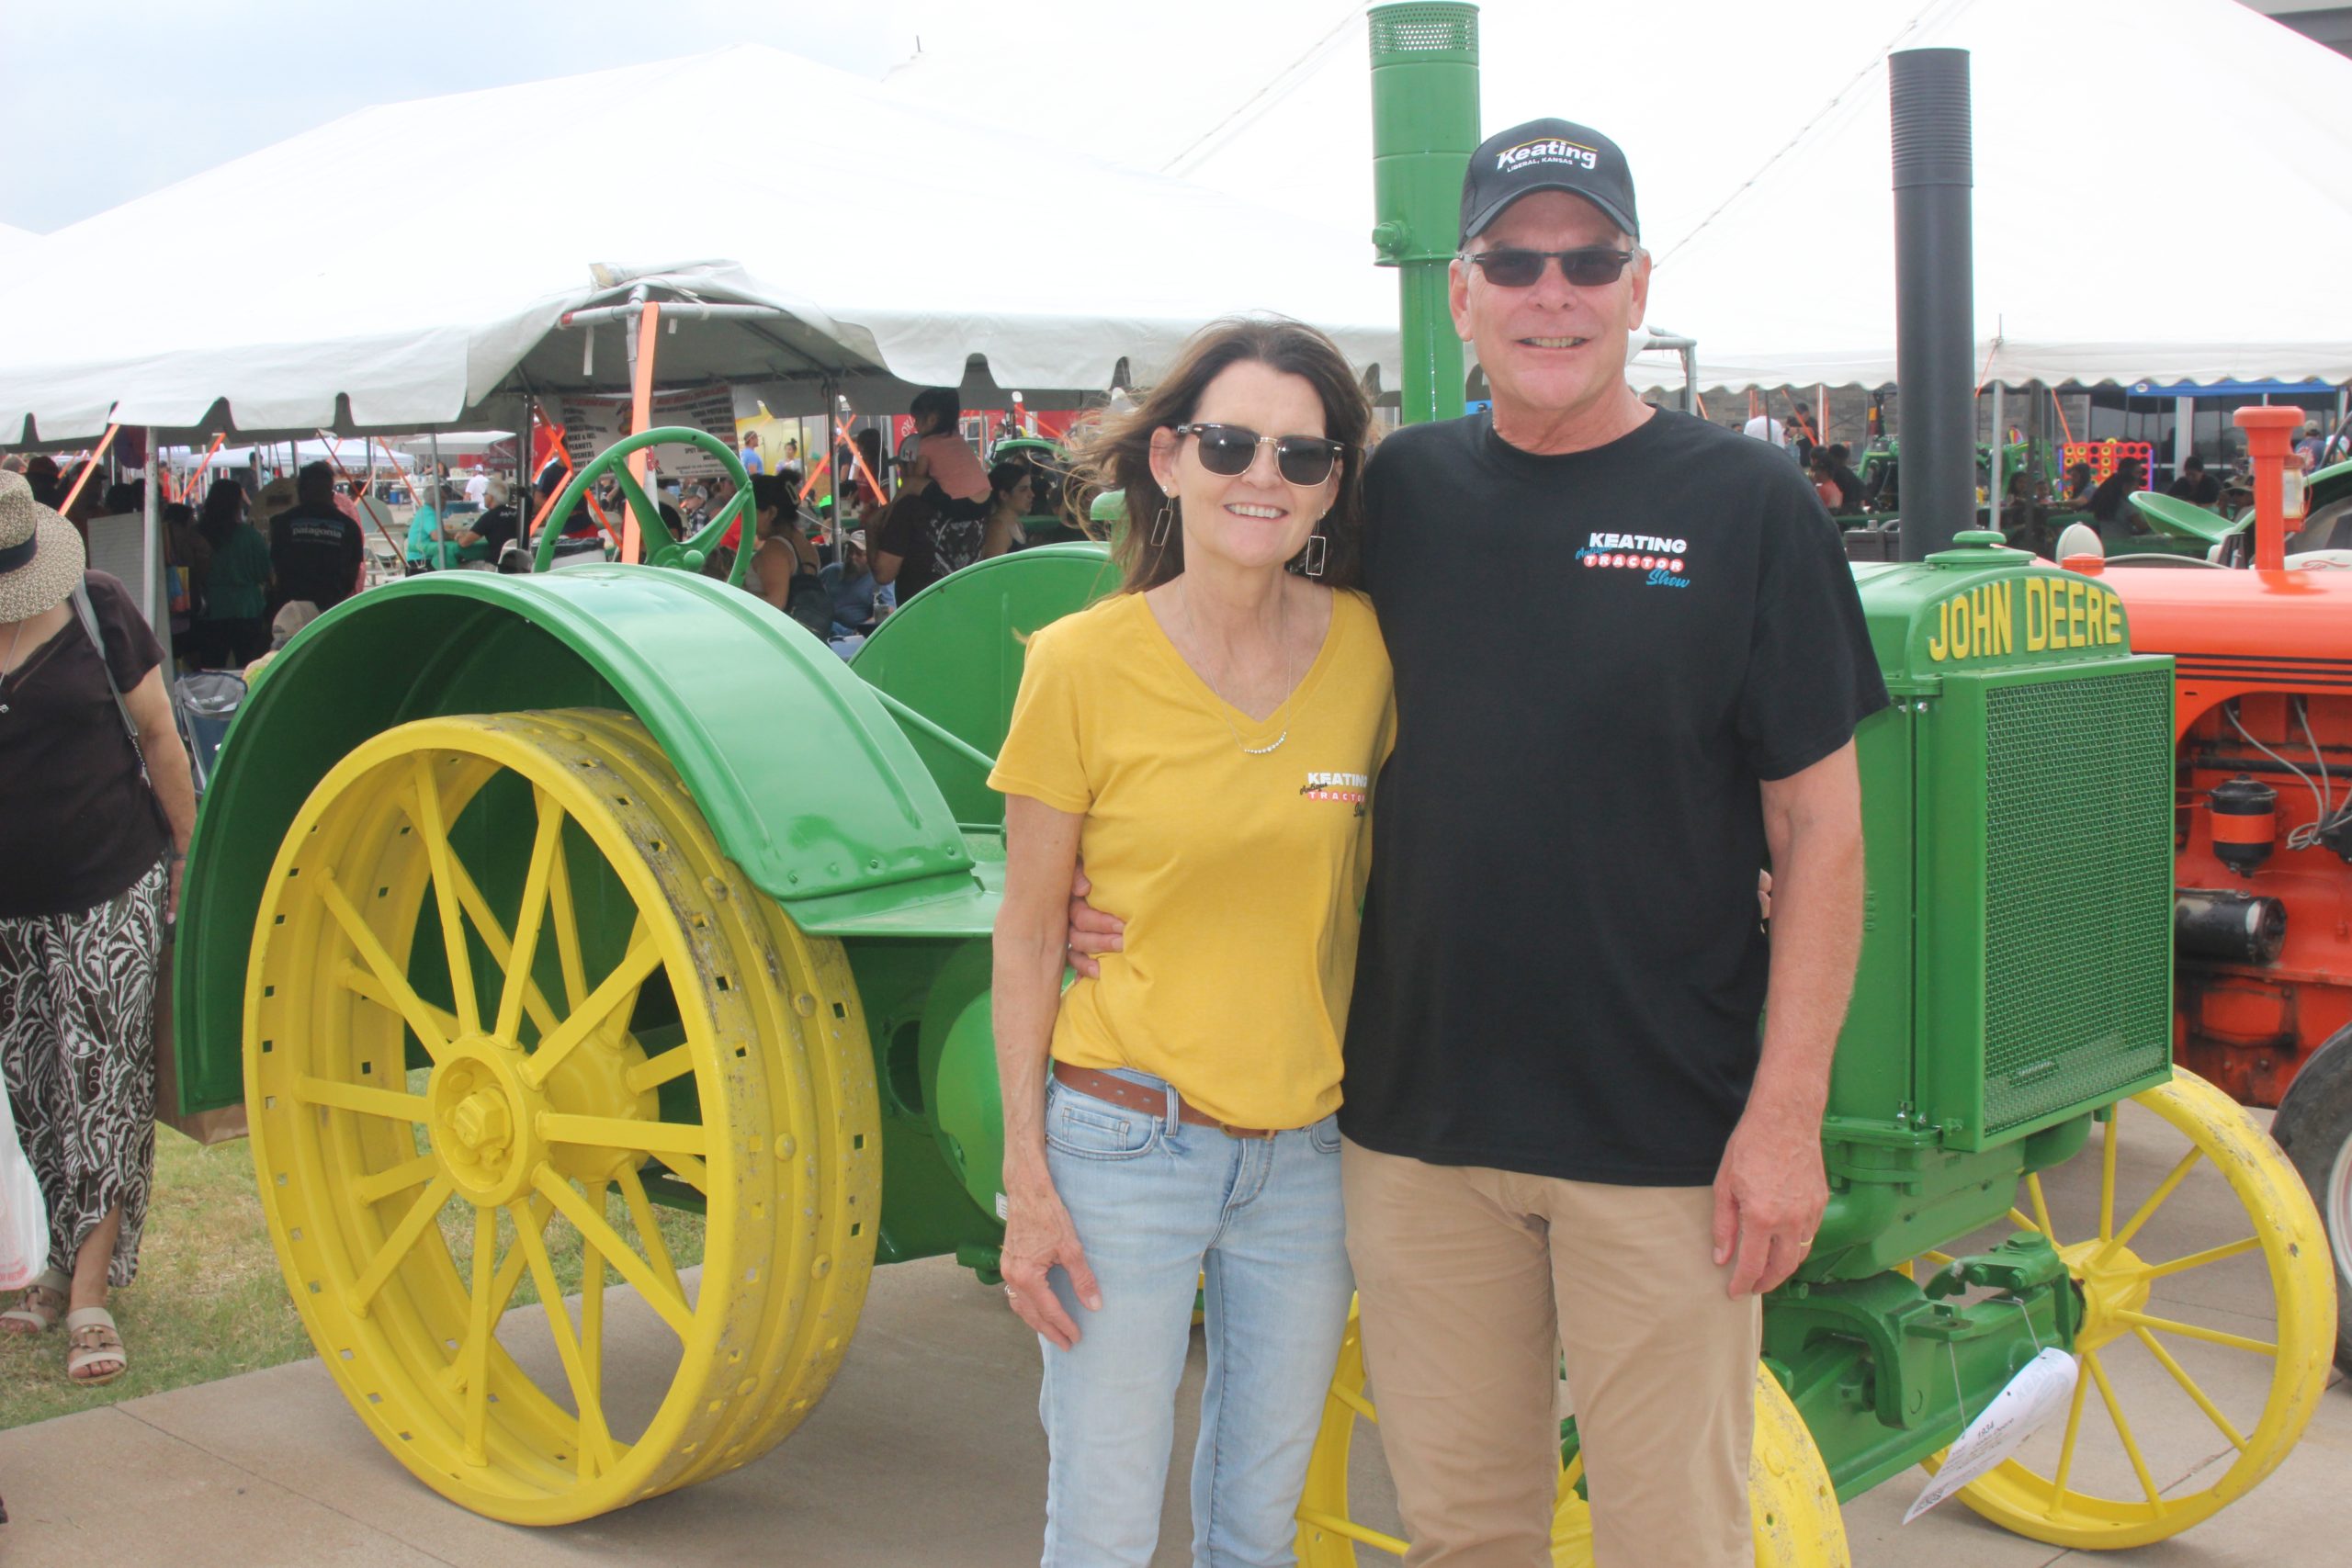 Julie (Keating) Parsons and Russ Keating, Liberal, Kansas, are pictured in front of a favorite tractor on display—a 1934 John Deere Model D owned by J.A. Waters from Kismet, Kansas. (Photo by Dave Bergmeier.)